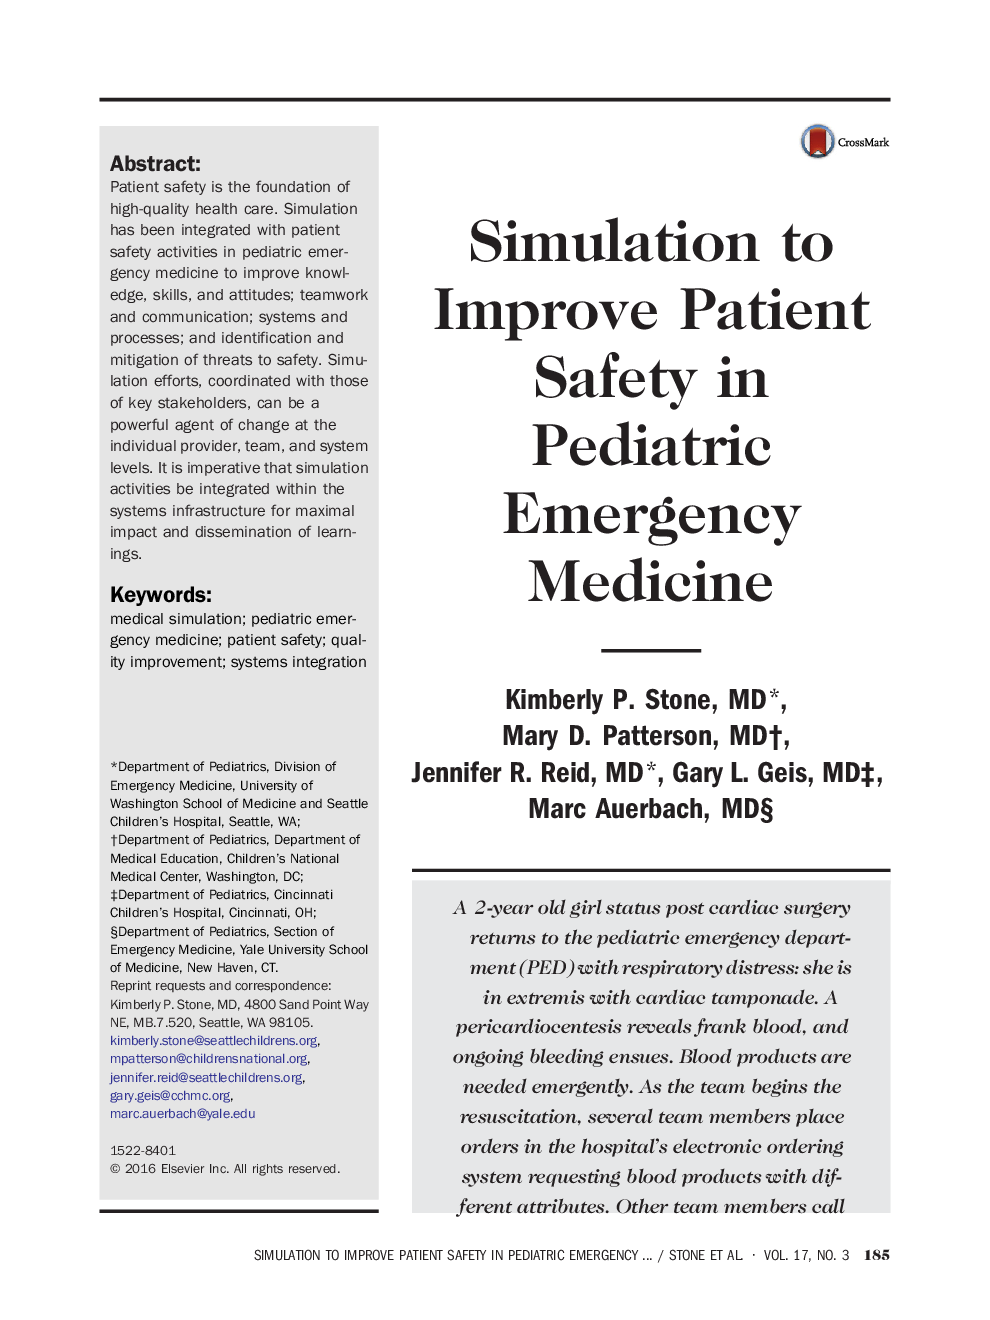 Simulation to Improve Patient Safety in Pediatric Emergency Medicine